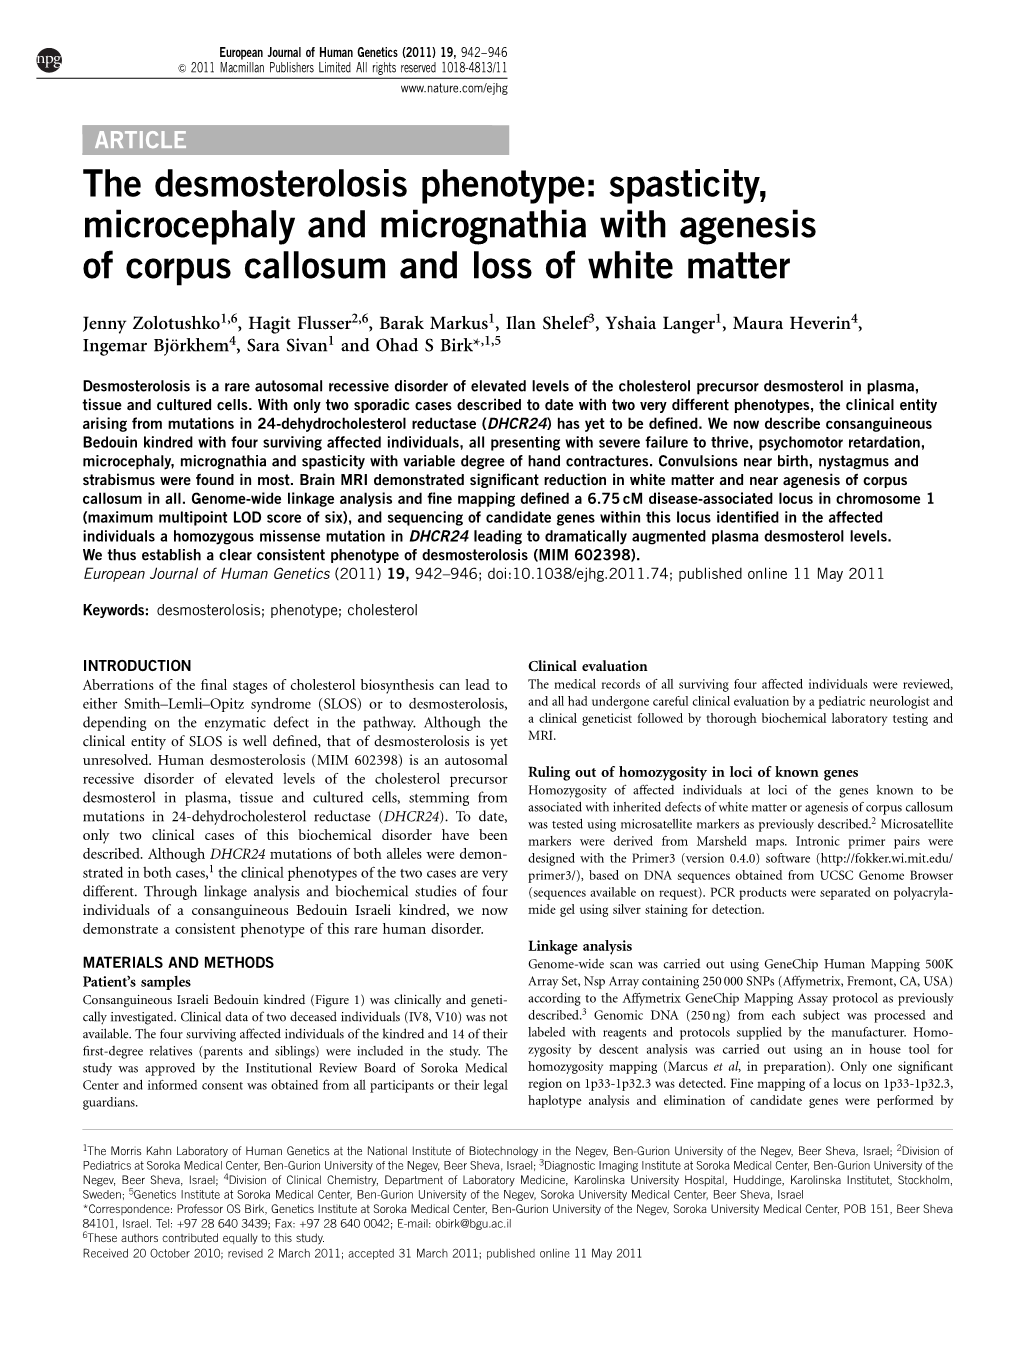 The Desmosterolosis Phenotype: Spasticity, Microcephaly and Micrognathia with Agenesis of Corpus Callosum and Loss of White Matter